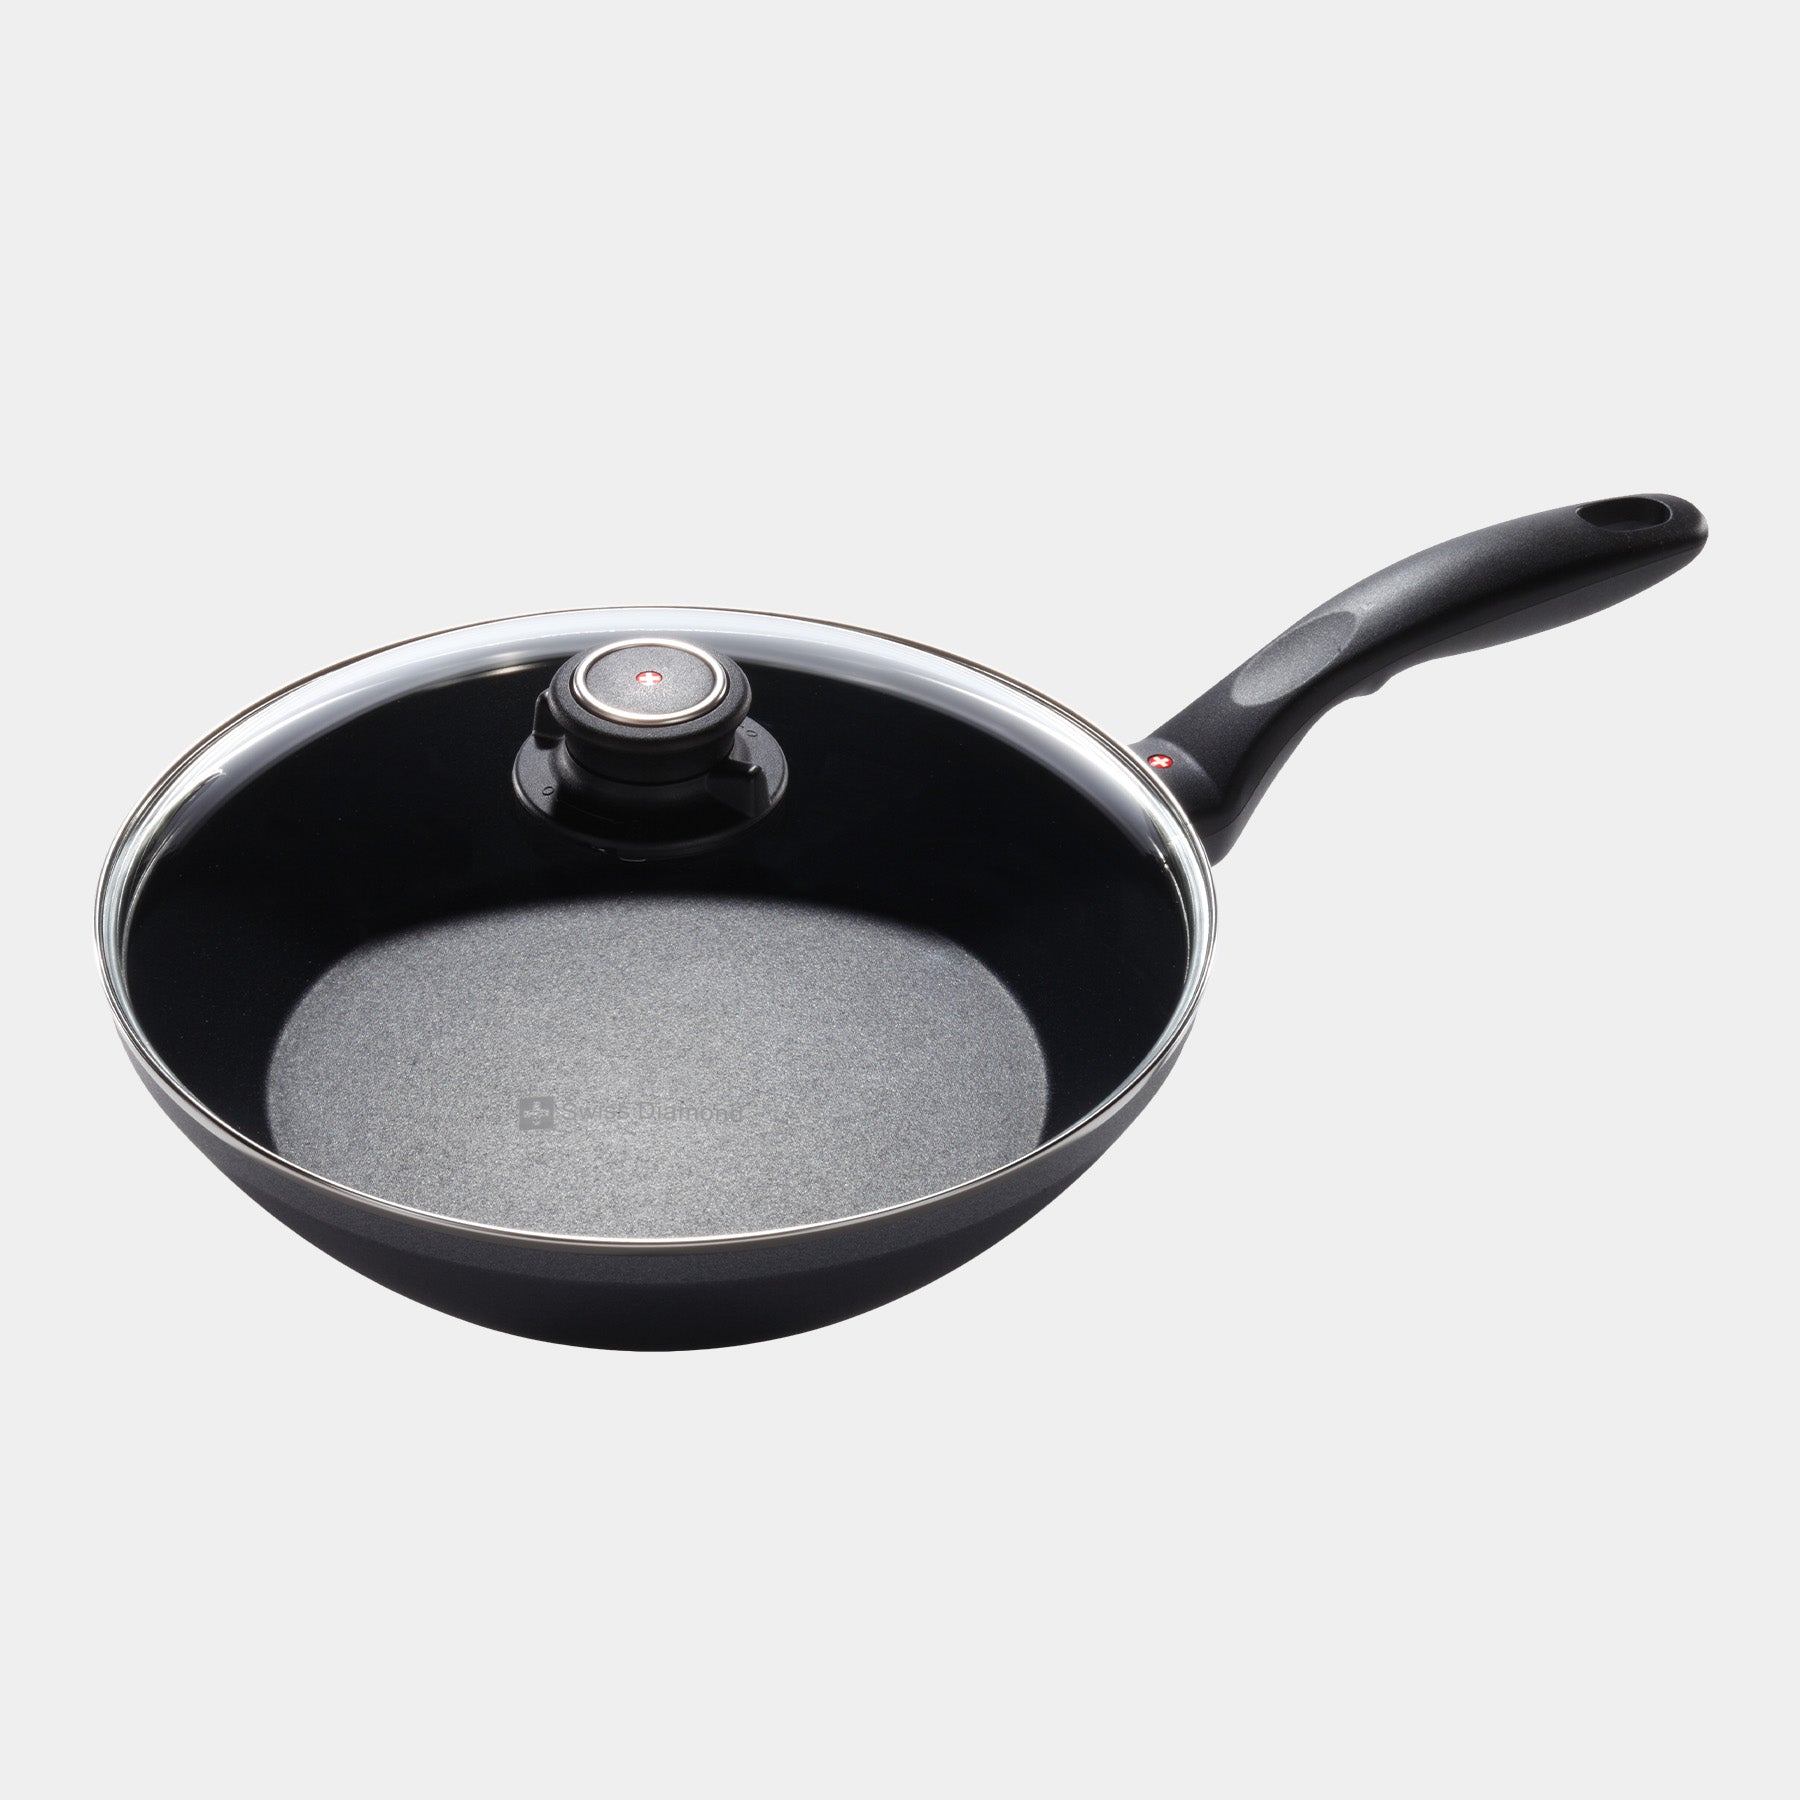 HD Nonstick 9.5" Stir-Fry Pan with Glass Lid